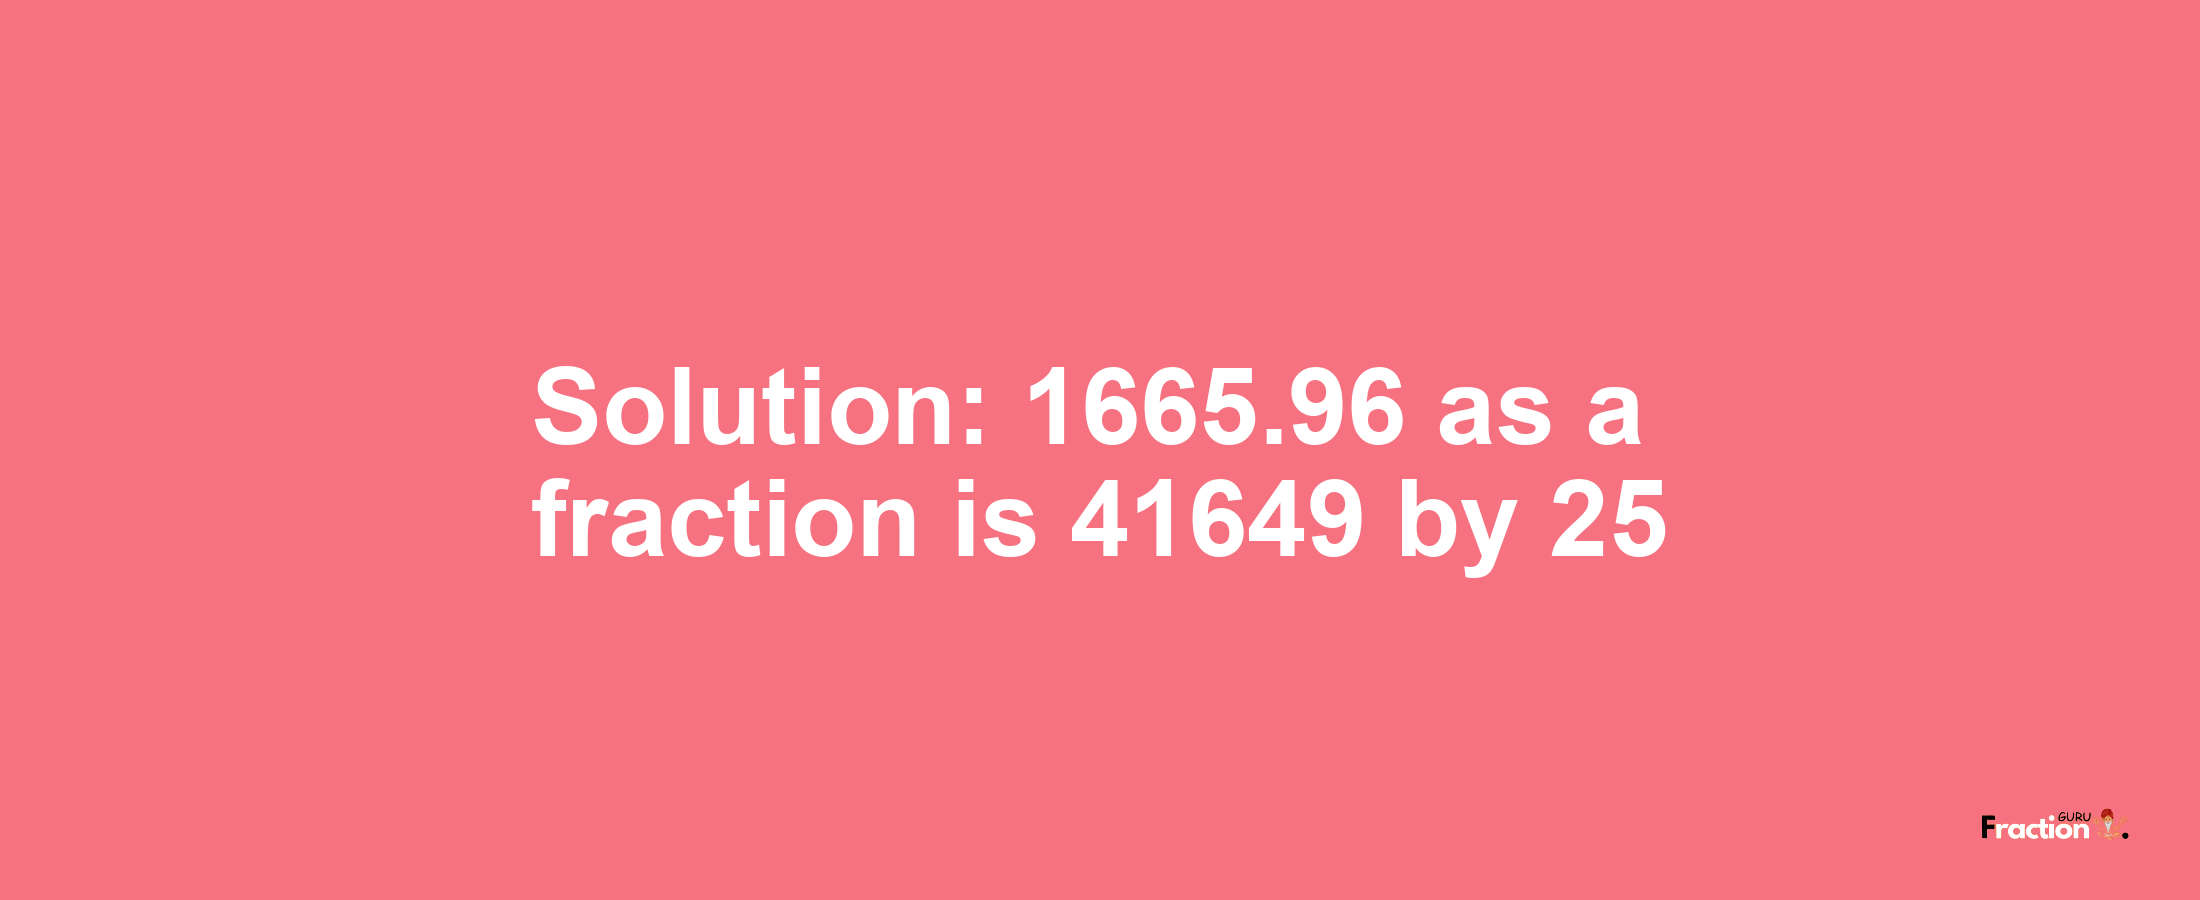 Solution:1665.96 as a fraction is 41649/25